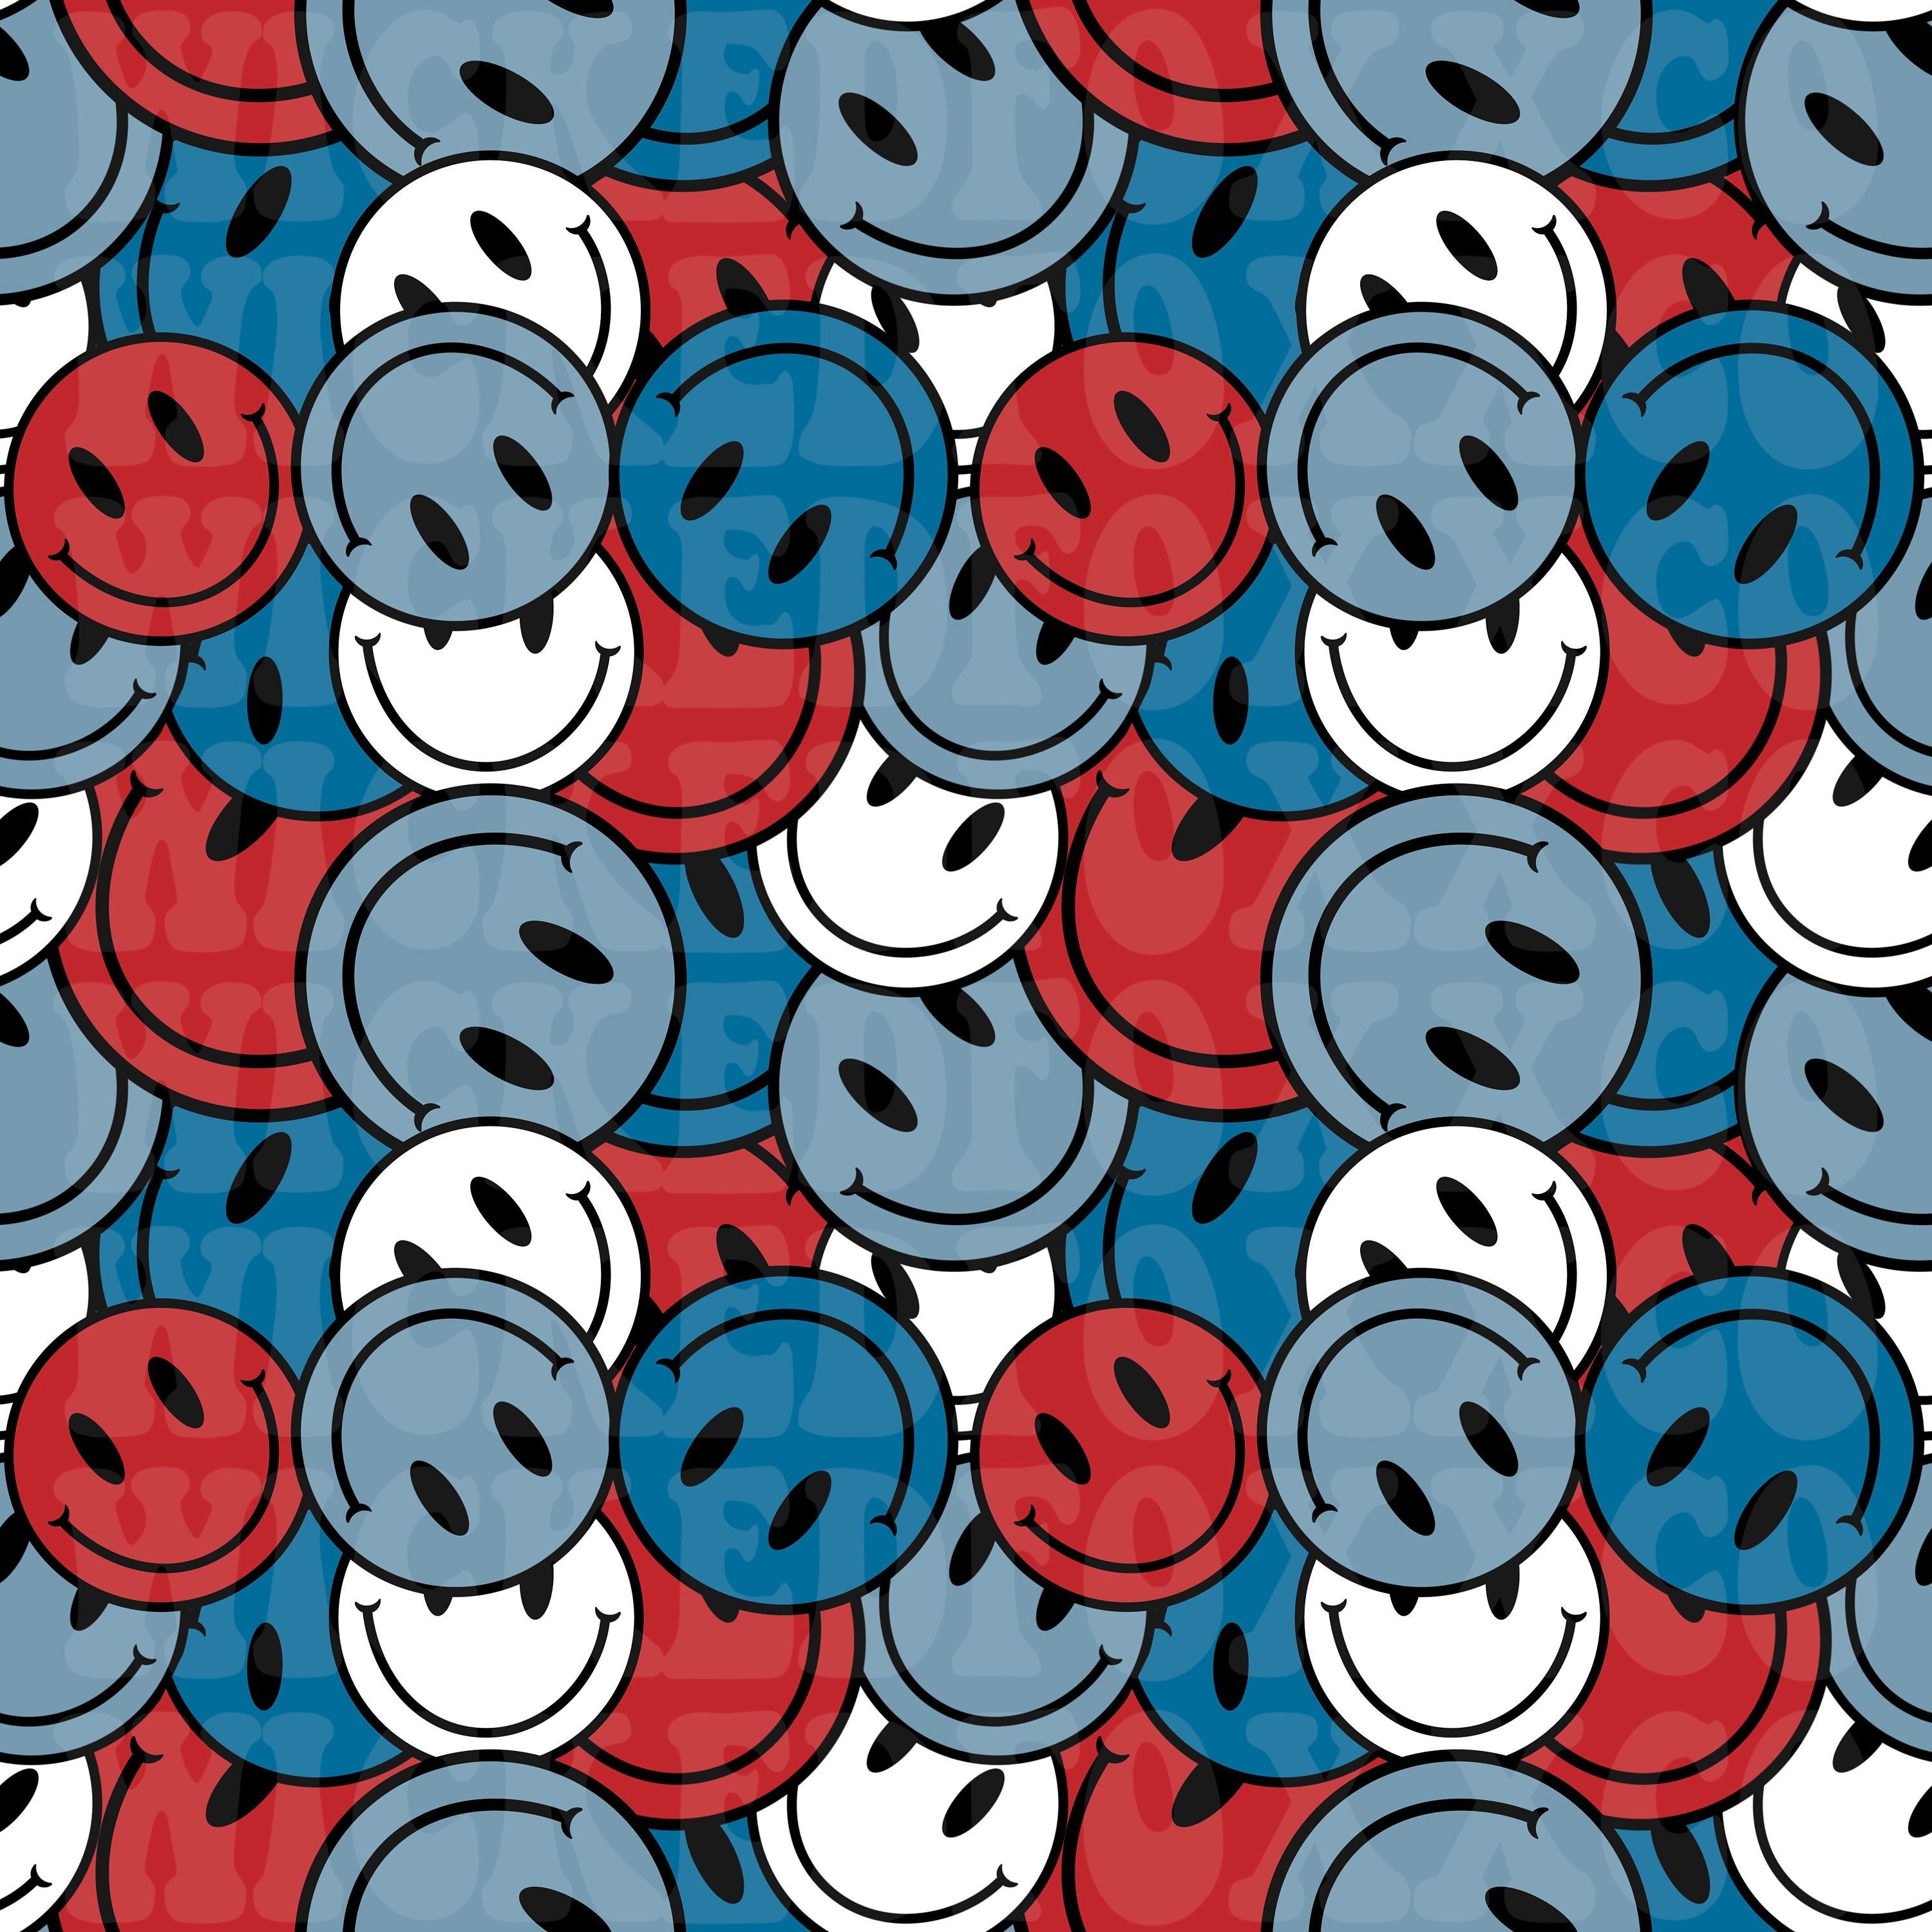 A pattern of red, white, and blue emojis, some of which are upside down. - Smiley